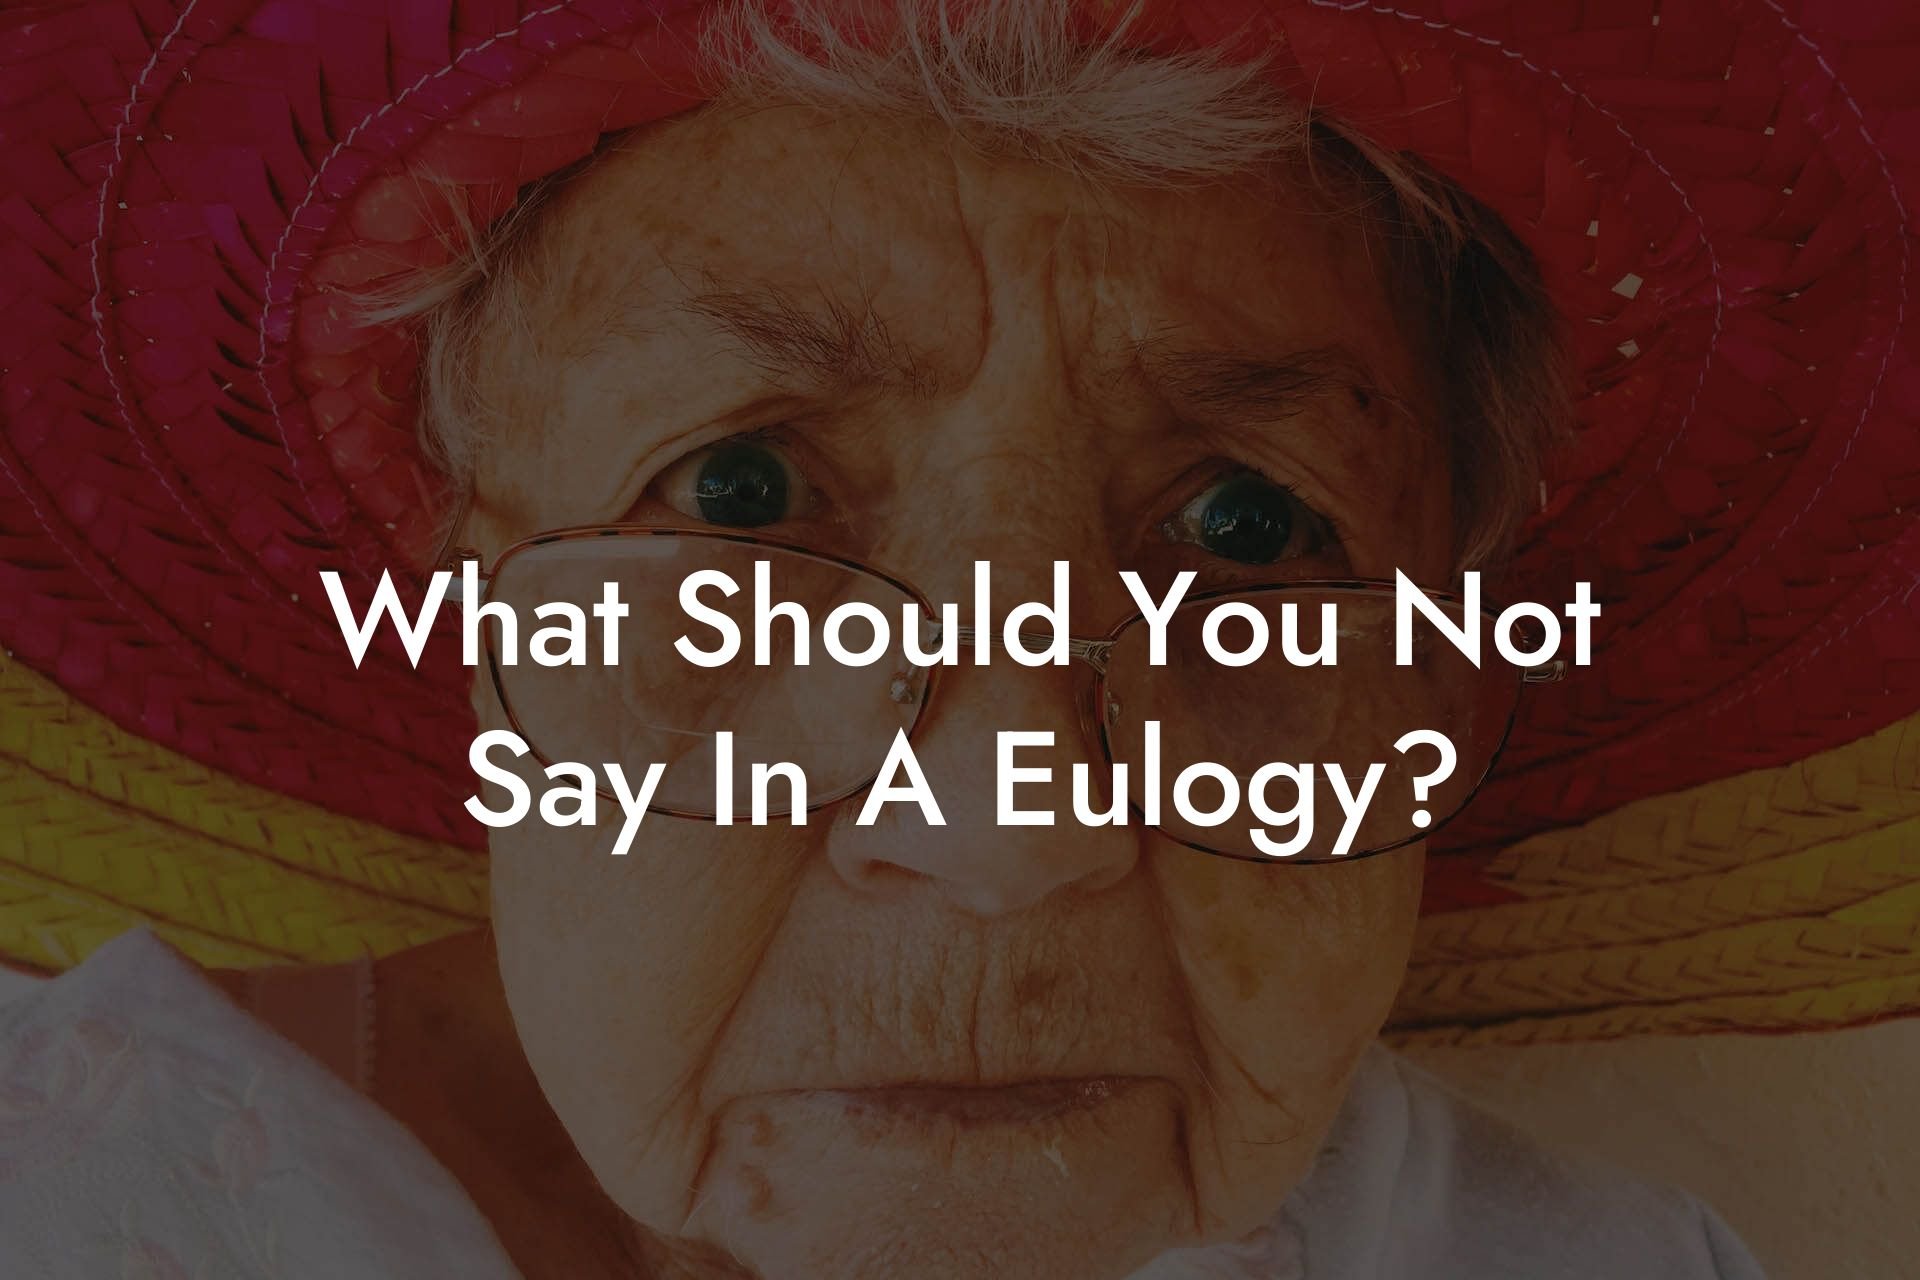 What Should You Not Say In A Eulogy?